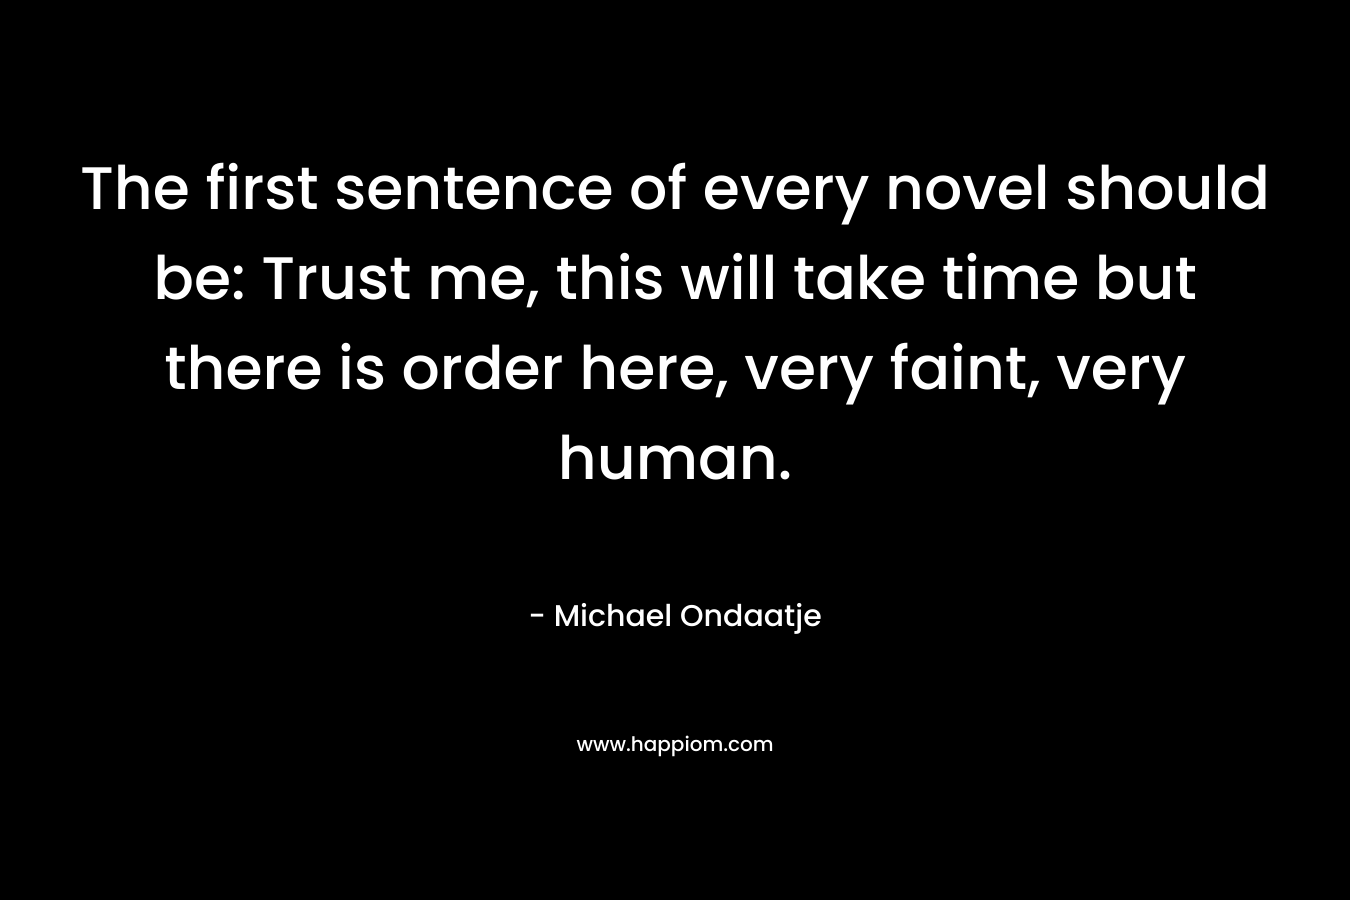 The first sentence of every novel should be: Trust me, this will take time but there is order here, very faint, very human.